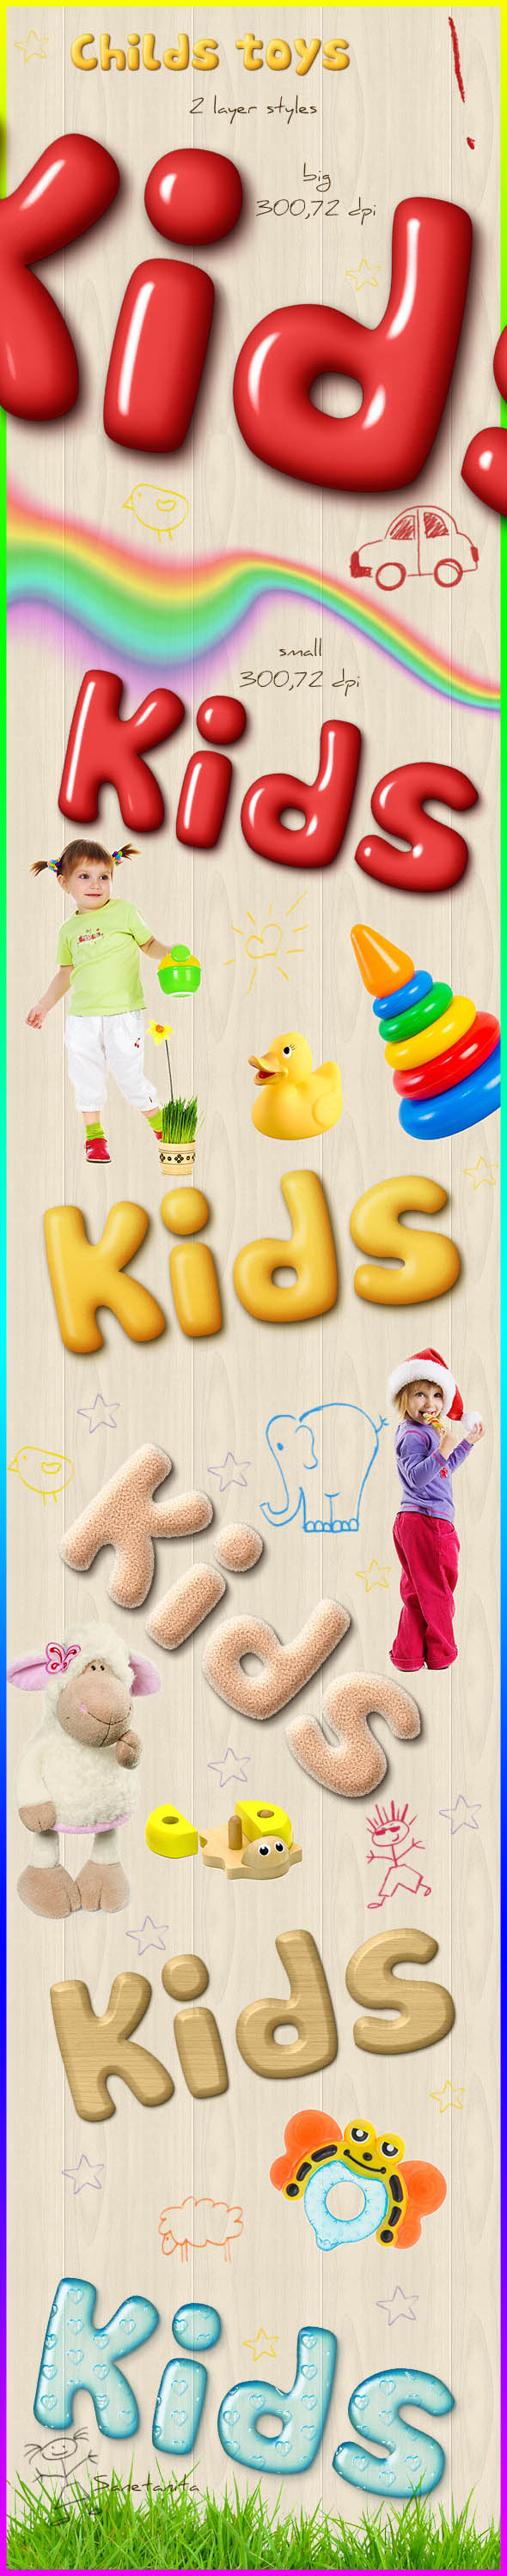 Childs Toys Styles